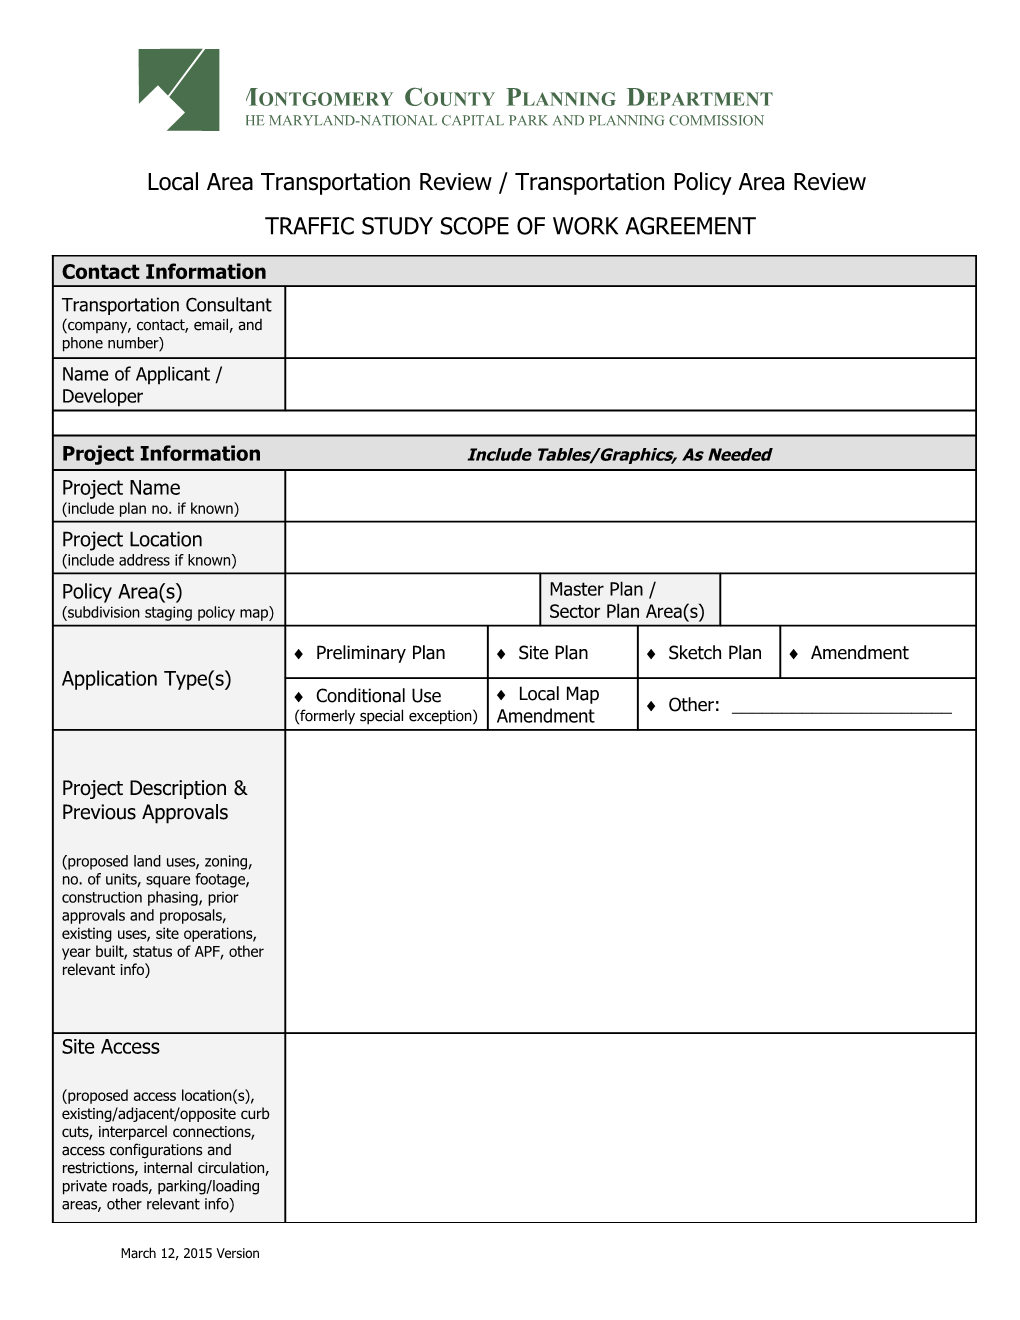 Local Area Transportation Review / Transportation Policy Area Review